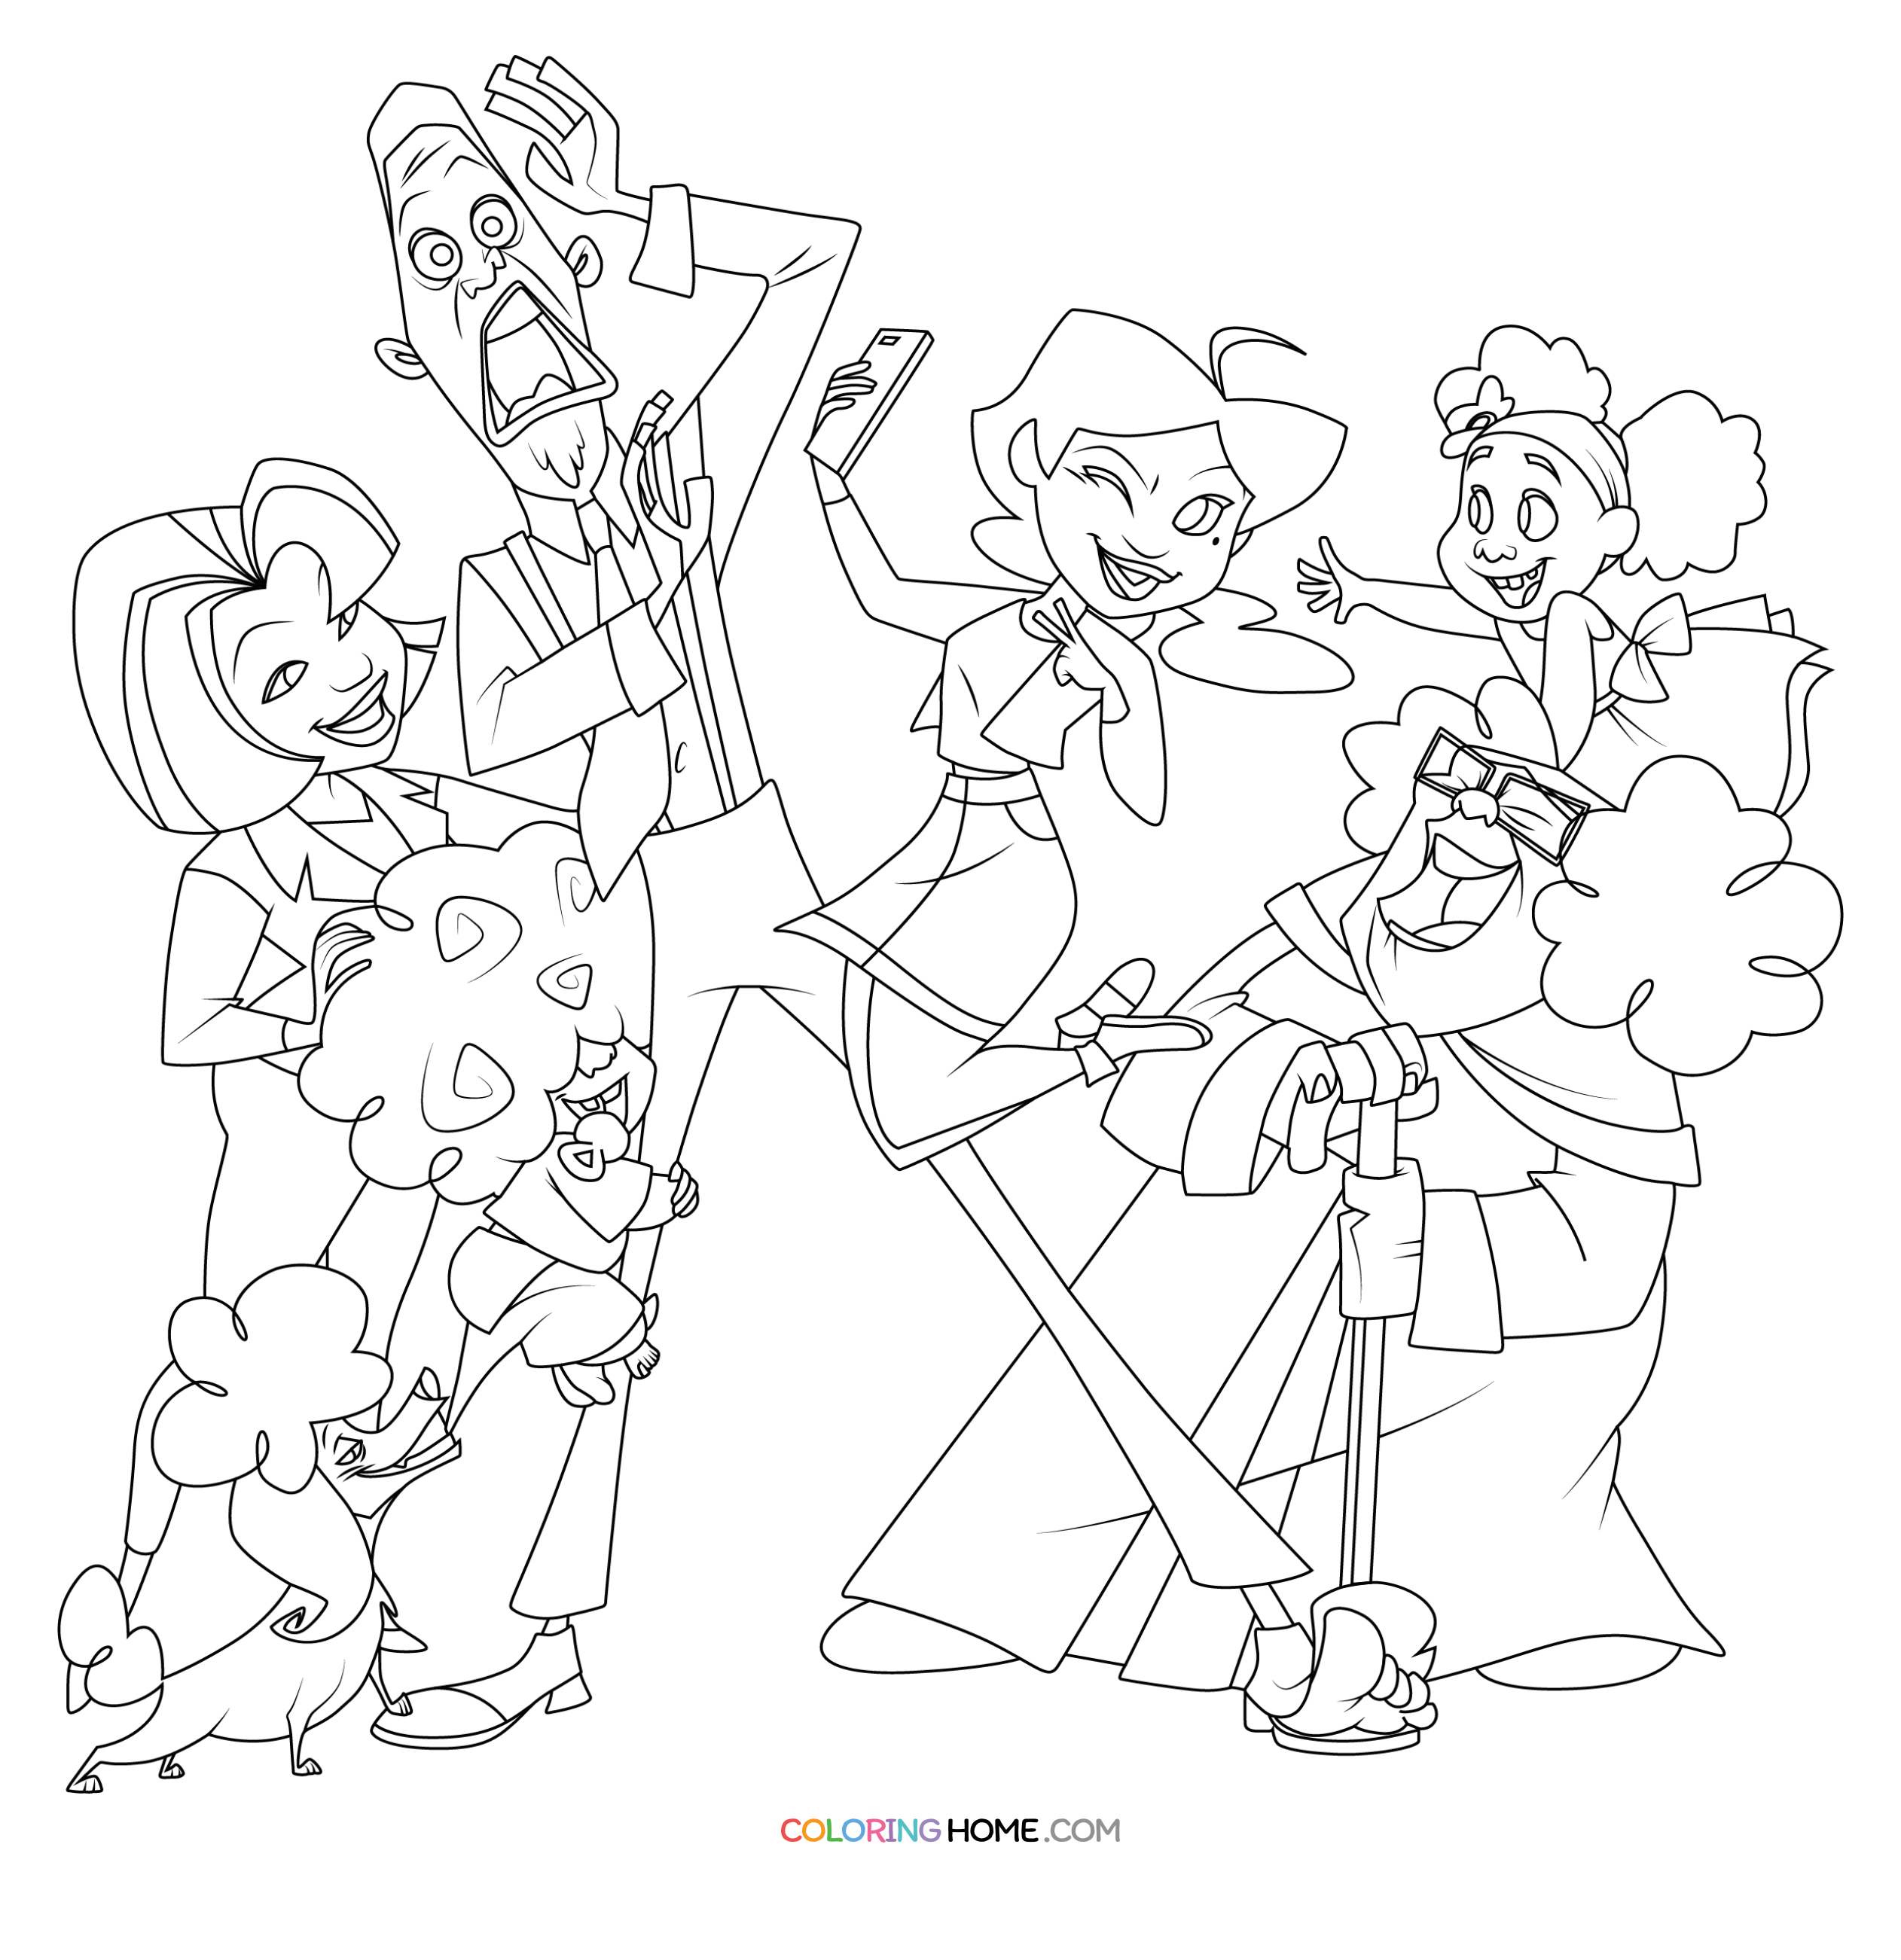  coloring page